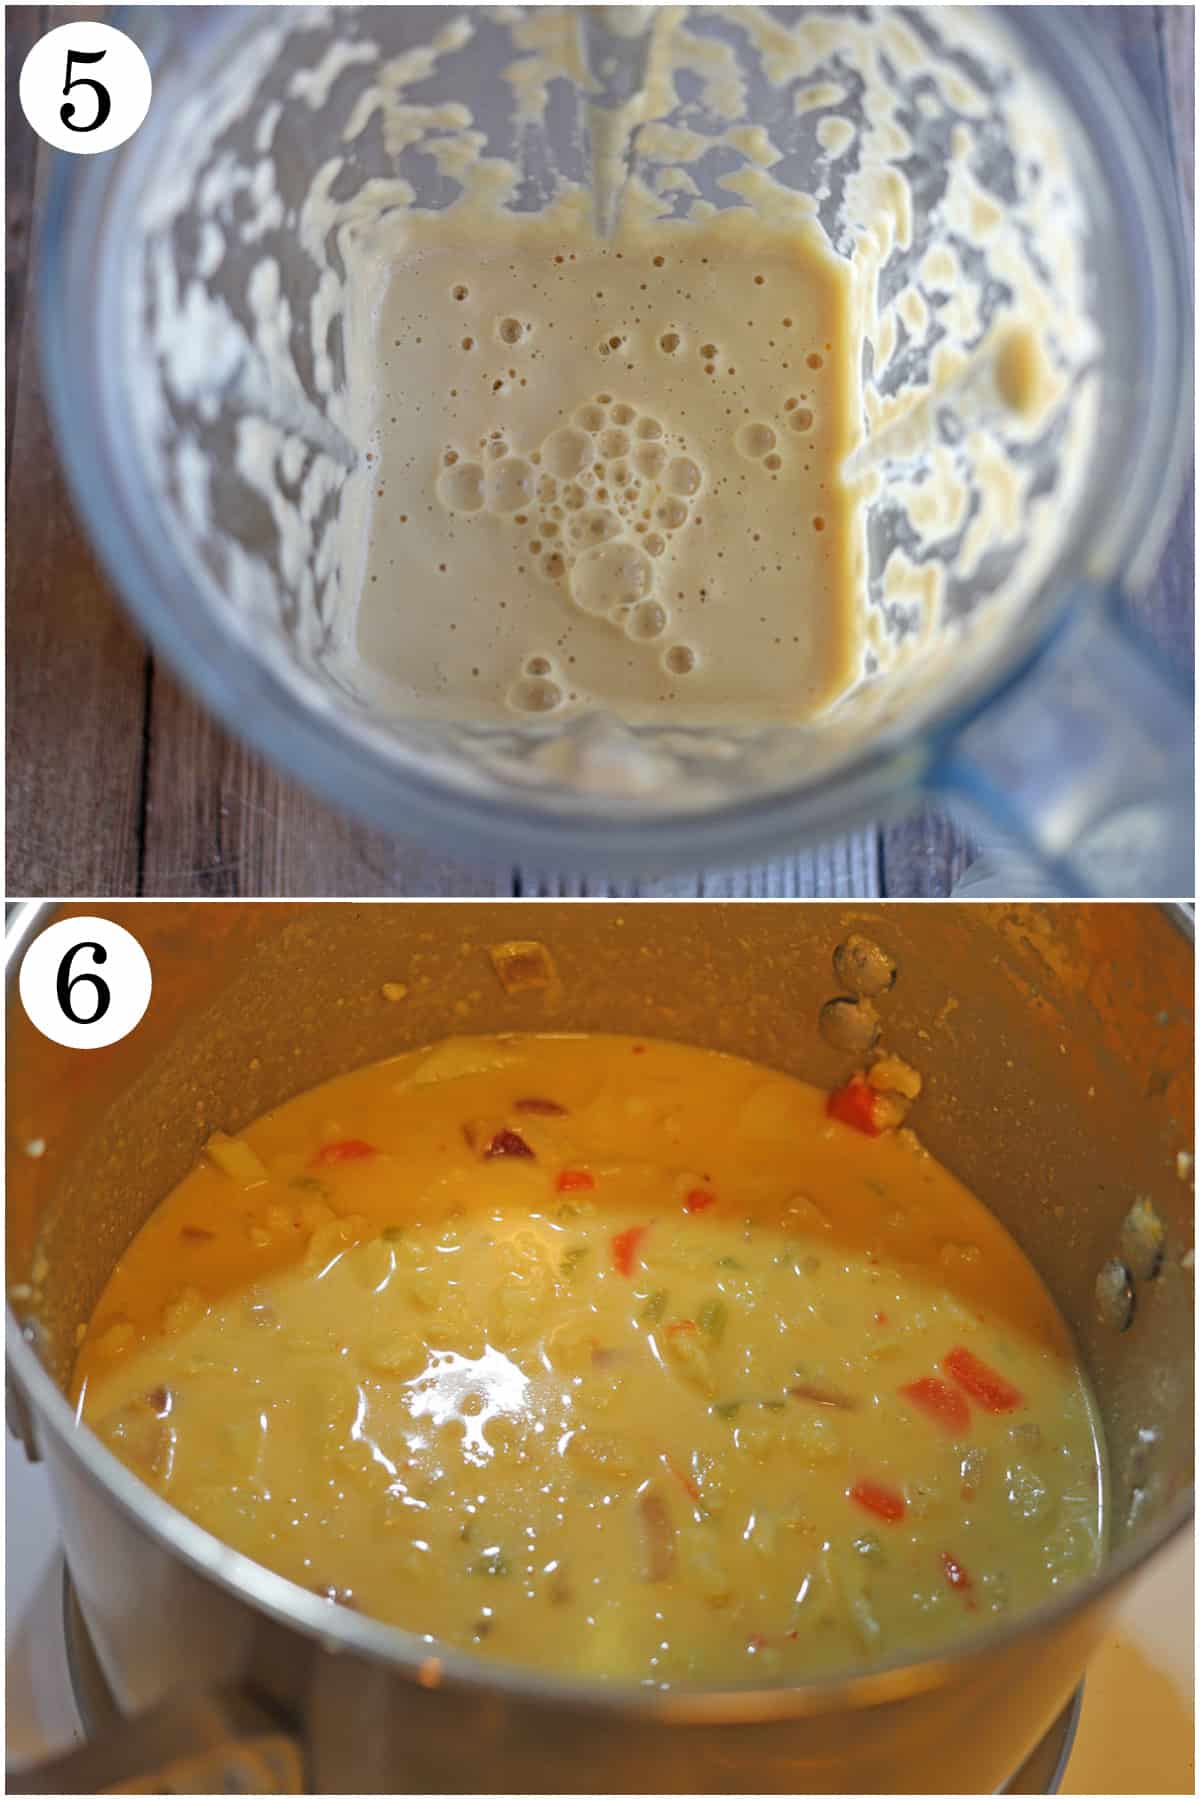 Two-panel collage with cashew cream in blender and creamy soup in pot.